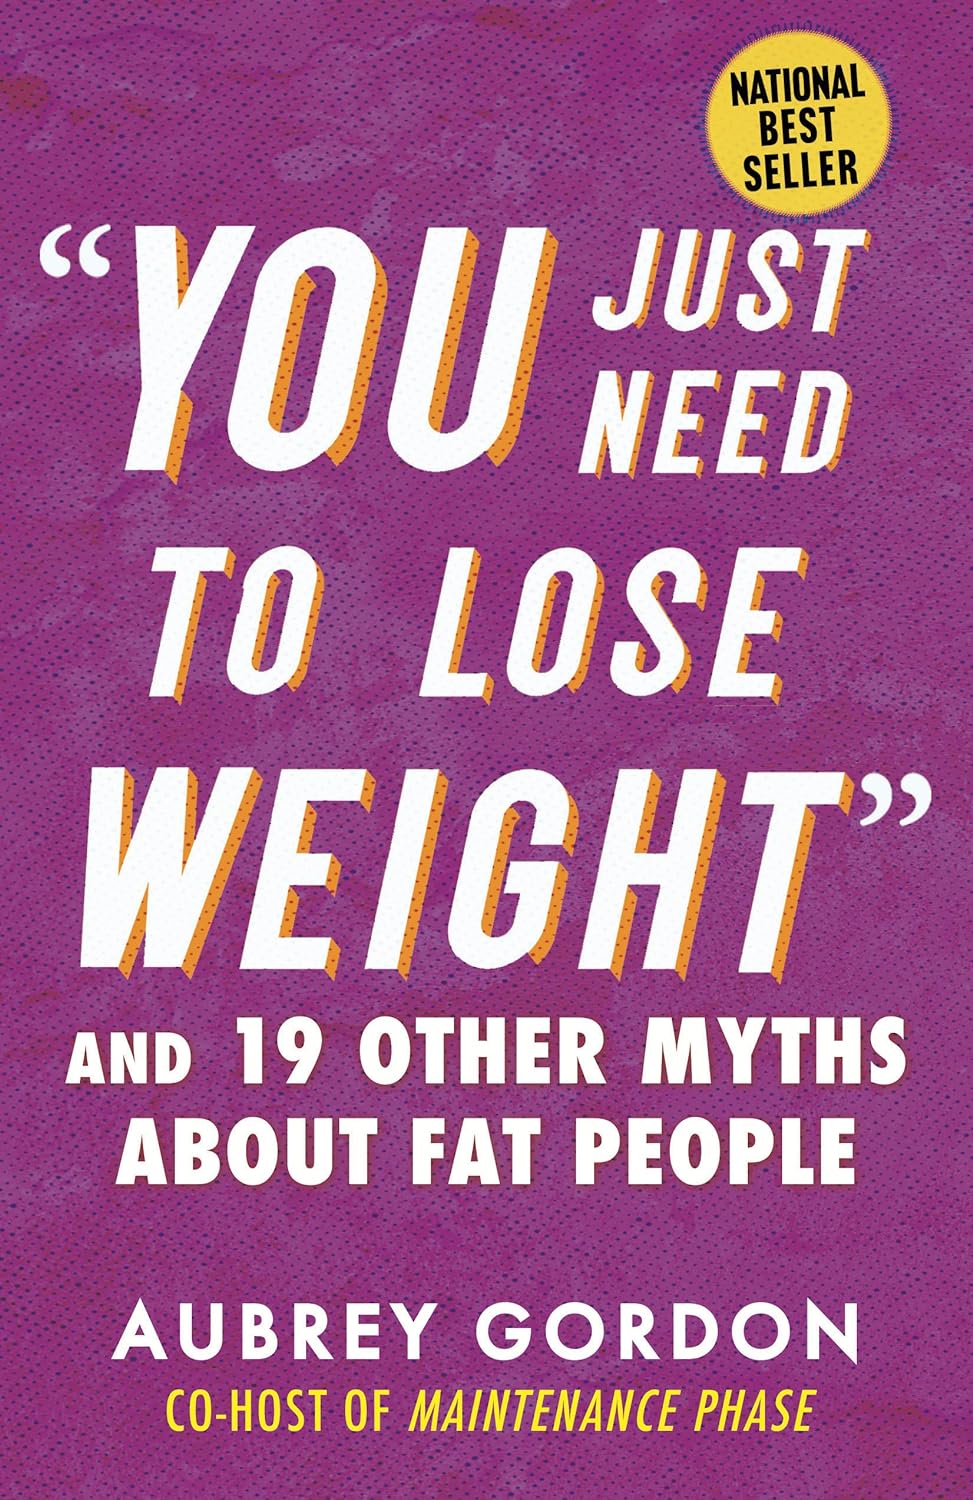 "You Just Need To Lose Weight" Book Cover